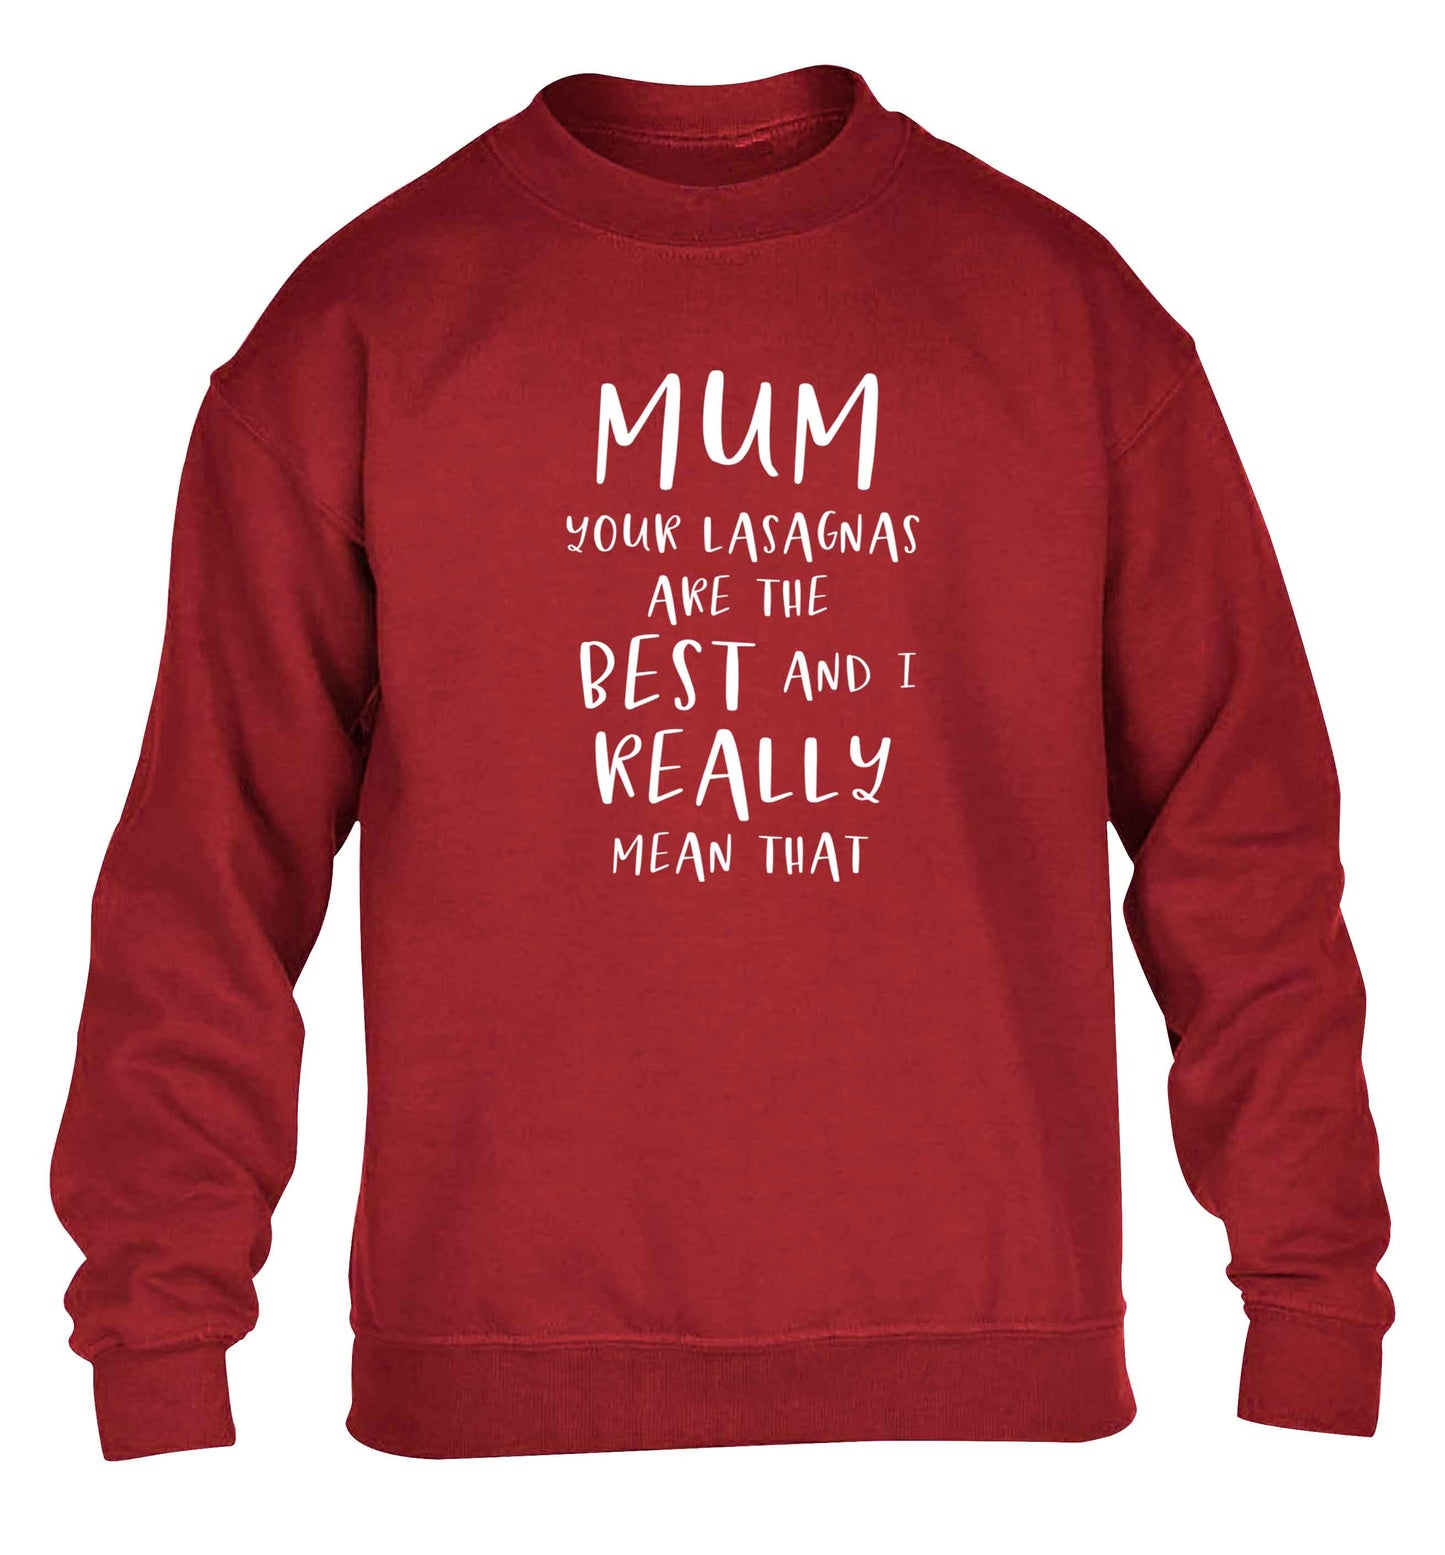 Funny gifts for your mum on mother's dayor her birthday! Mum your lasagnas are the best and I really mean that children's grey sweater 12-13 Years